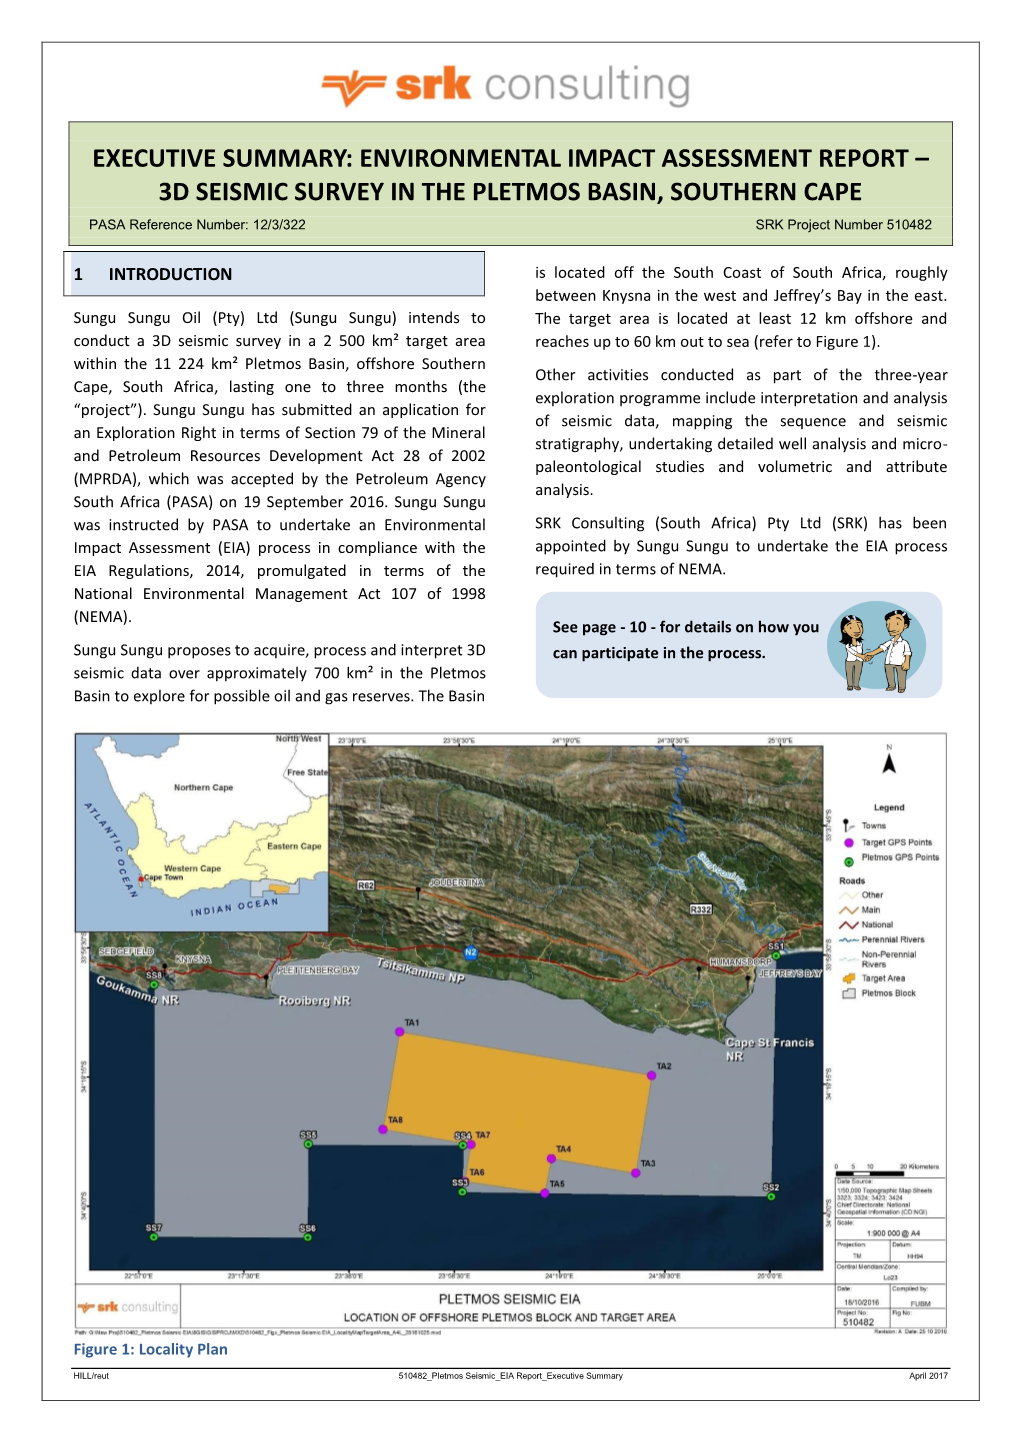 Executive Summary: Environmental Impact Assessment Report – 3D Seismic Survey in the Pletmos Basin, Southern Cape